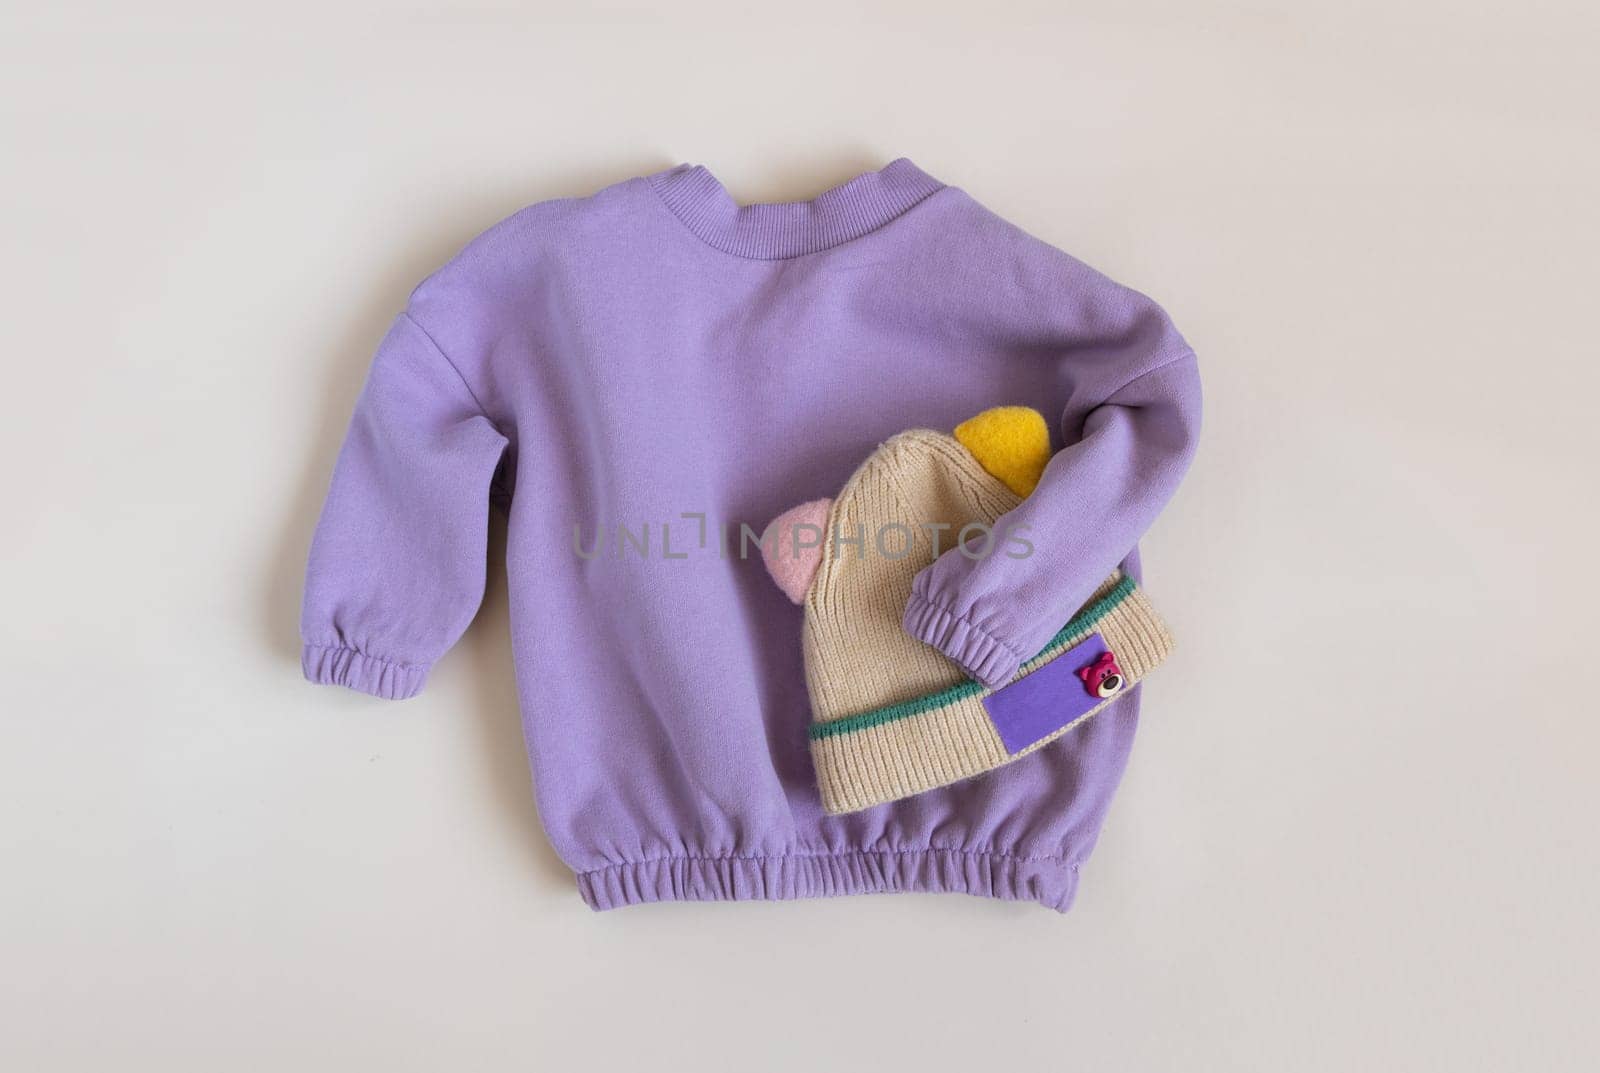 Stylish children's spring lilac sweatshirt and funny hat. Fashion kids outfit for for spring, autumn or winter. Flat lay, top view.